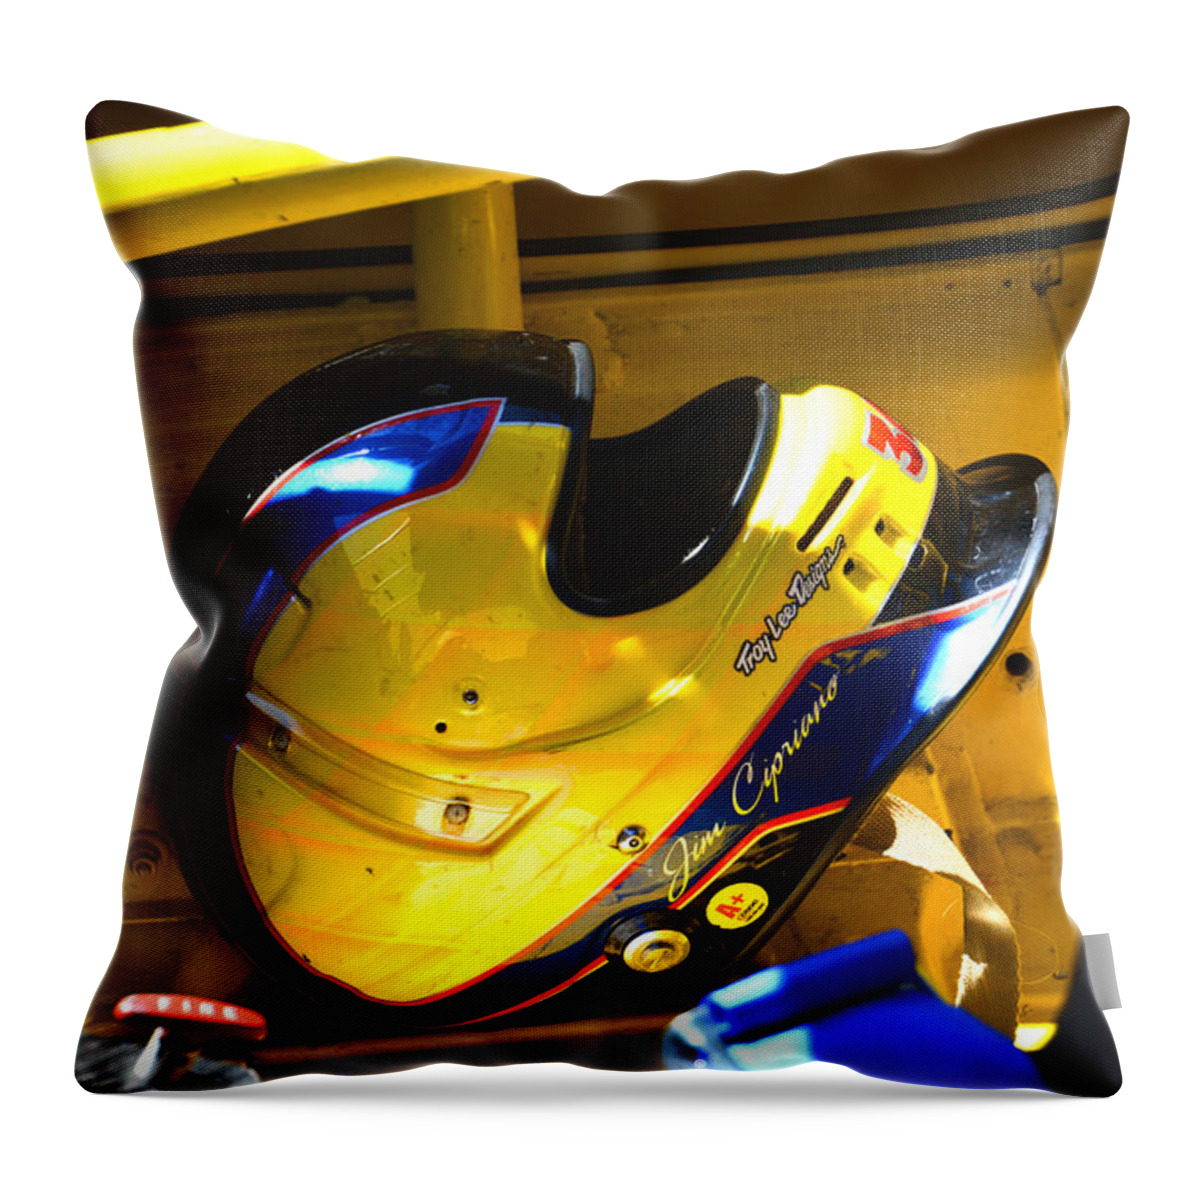 Porsche Throw Pillow featuring the photograph Jim Cipriano's Helmet by Mike Martin